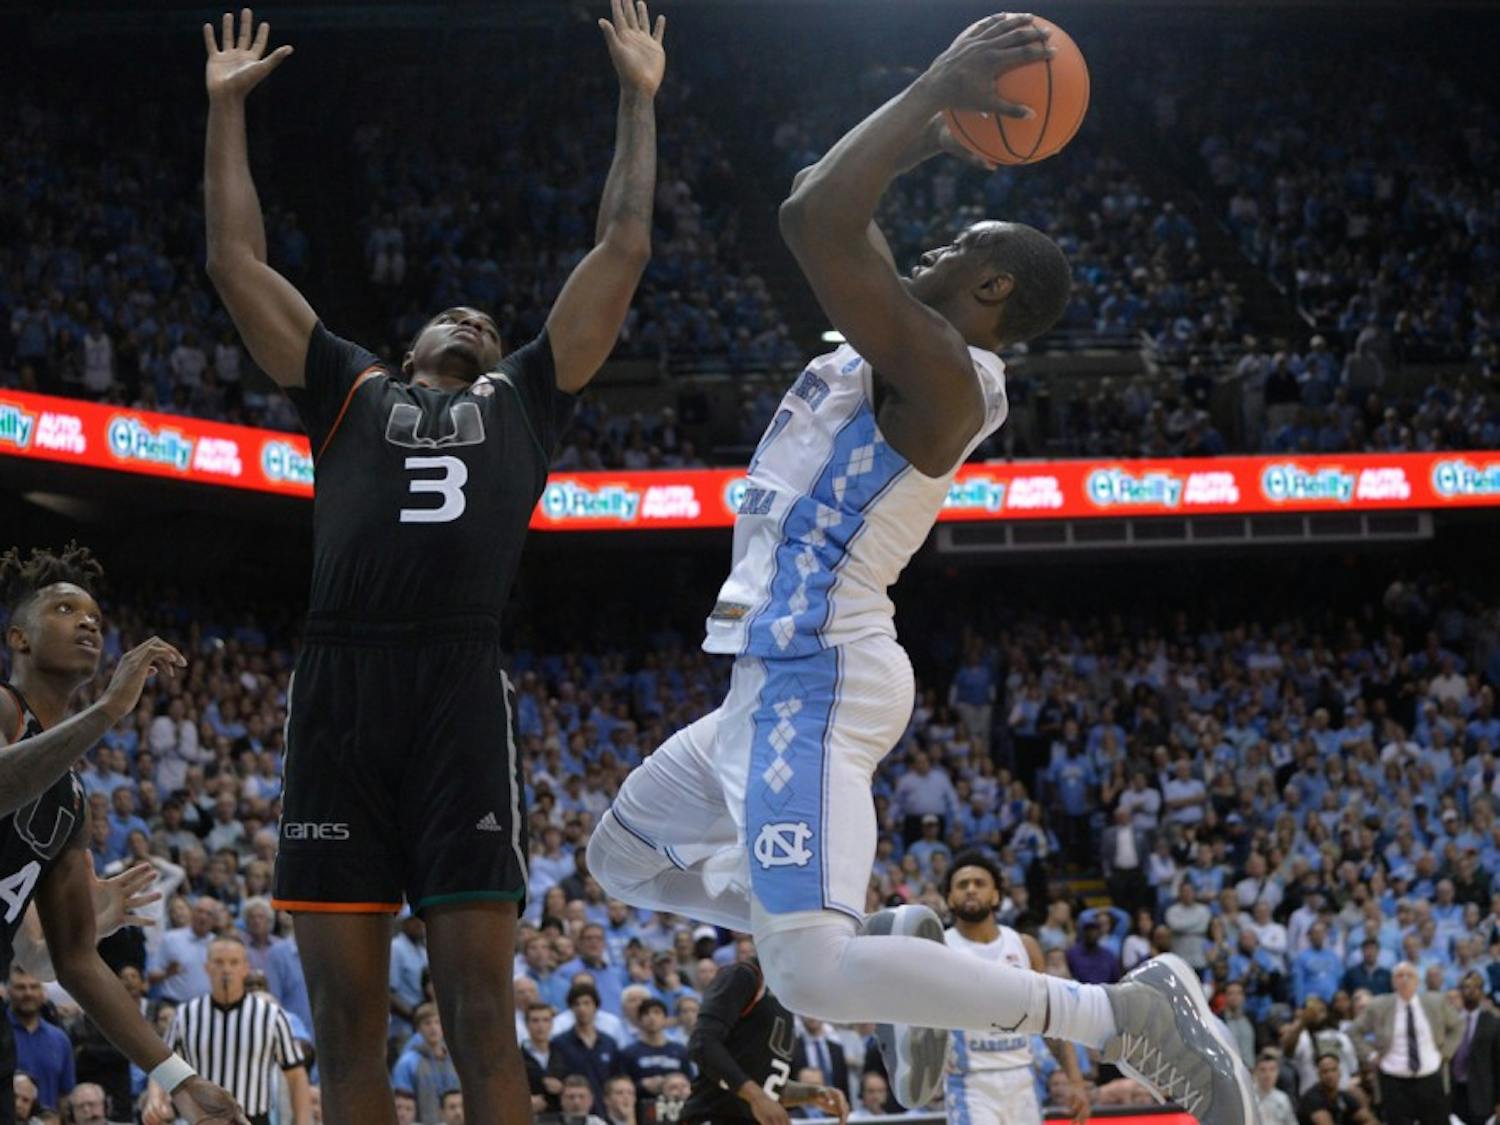 Senior forward Theo Pinson (1) rises up for a shot against Miami on Feb. 27 at the Smith Center.